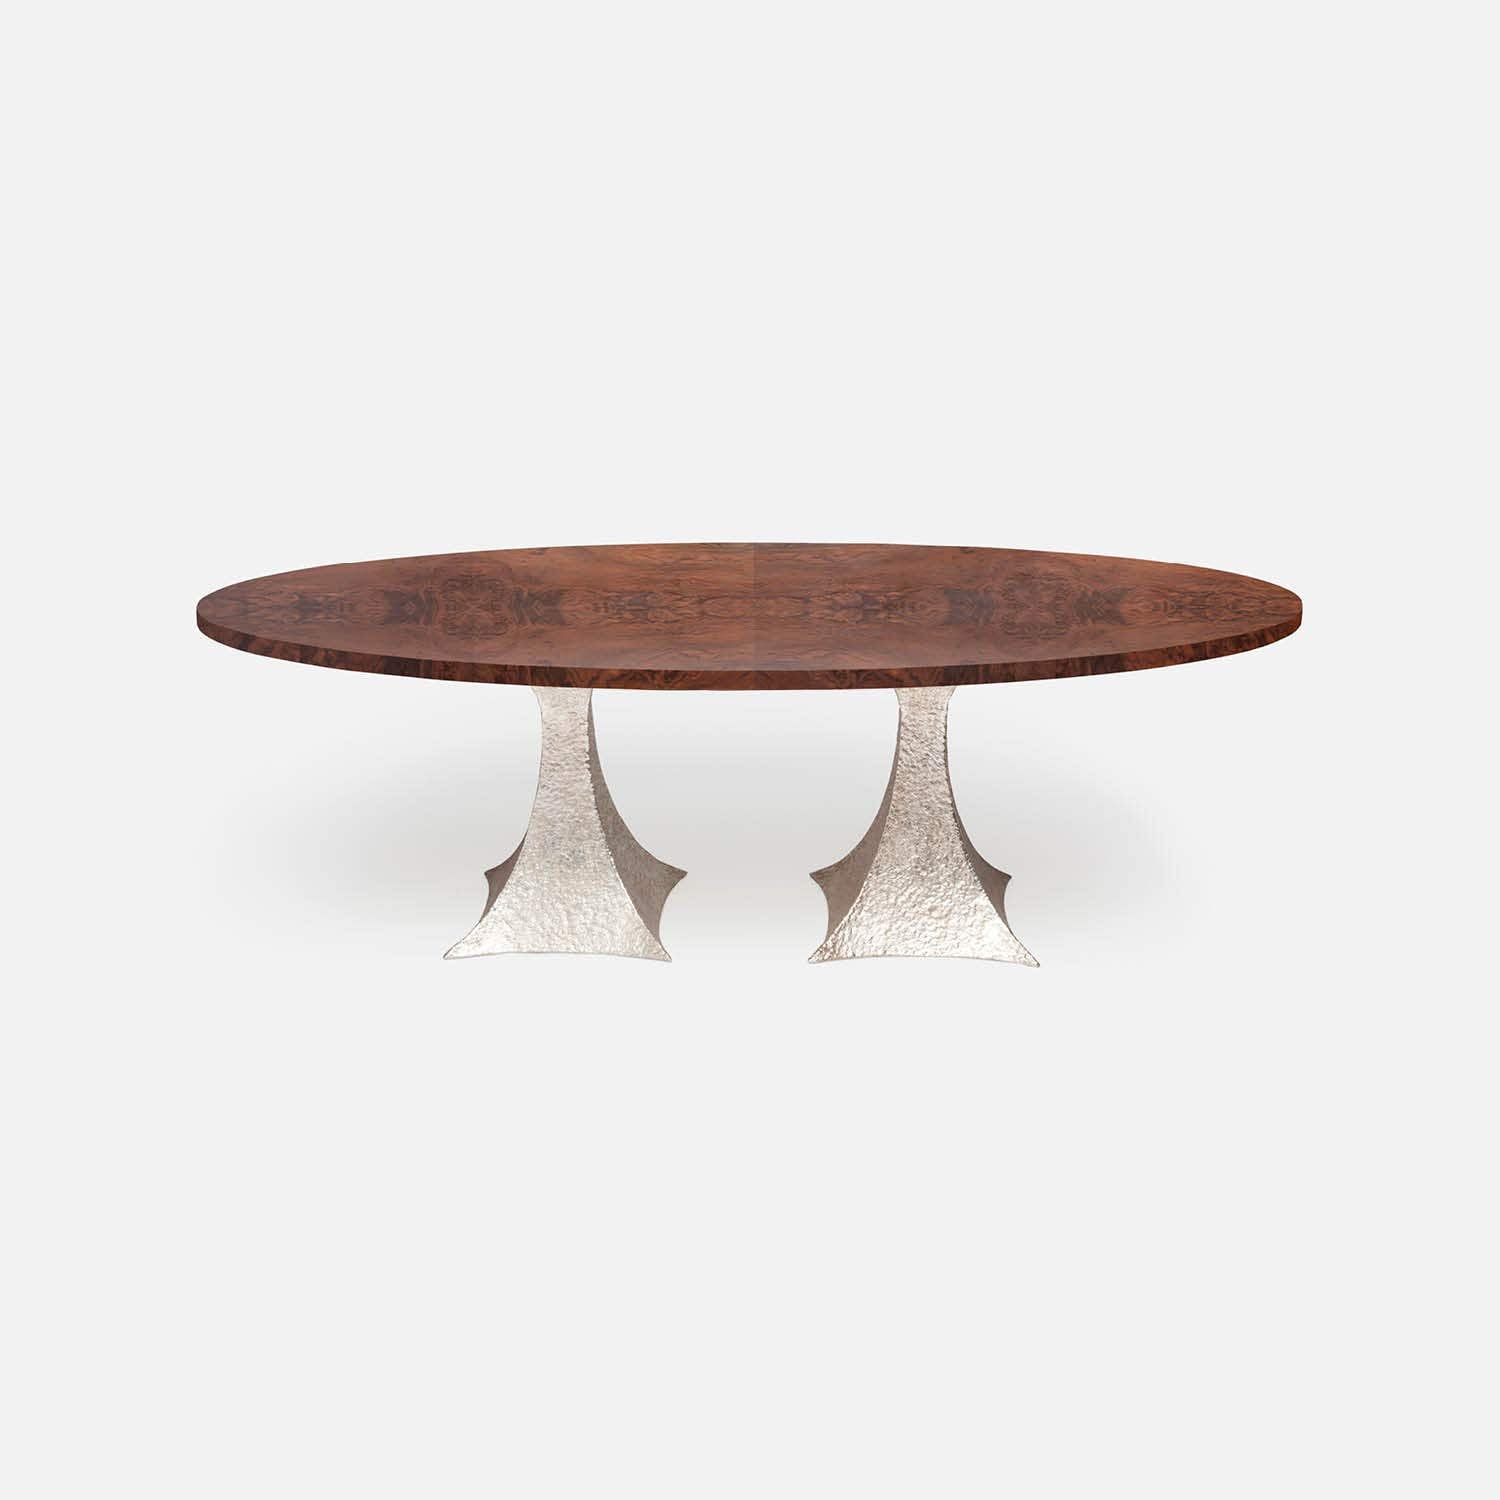 Made Goods Noor 84" x 42" x 30" Double Base Bumpy Cool Silver Iron Dinning Table With Oval Walnut Veneer Table Top